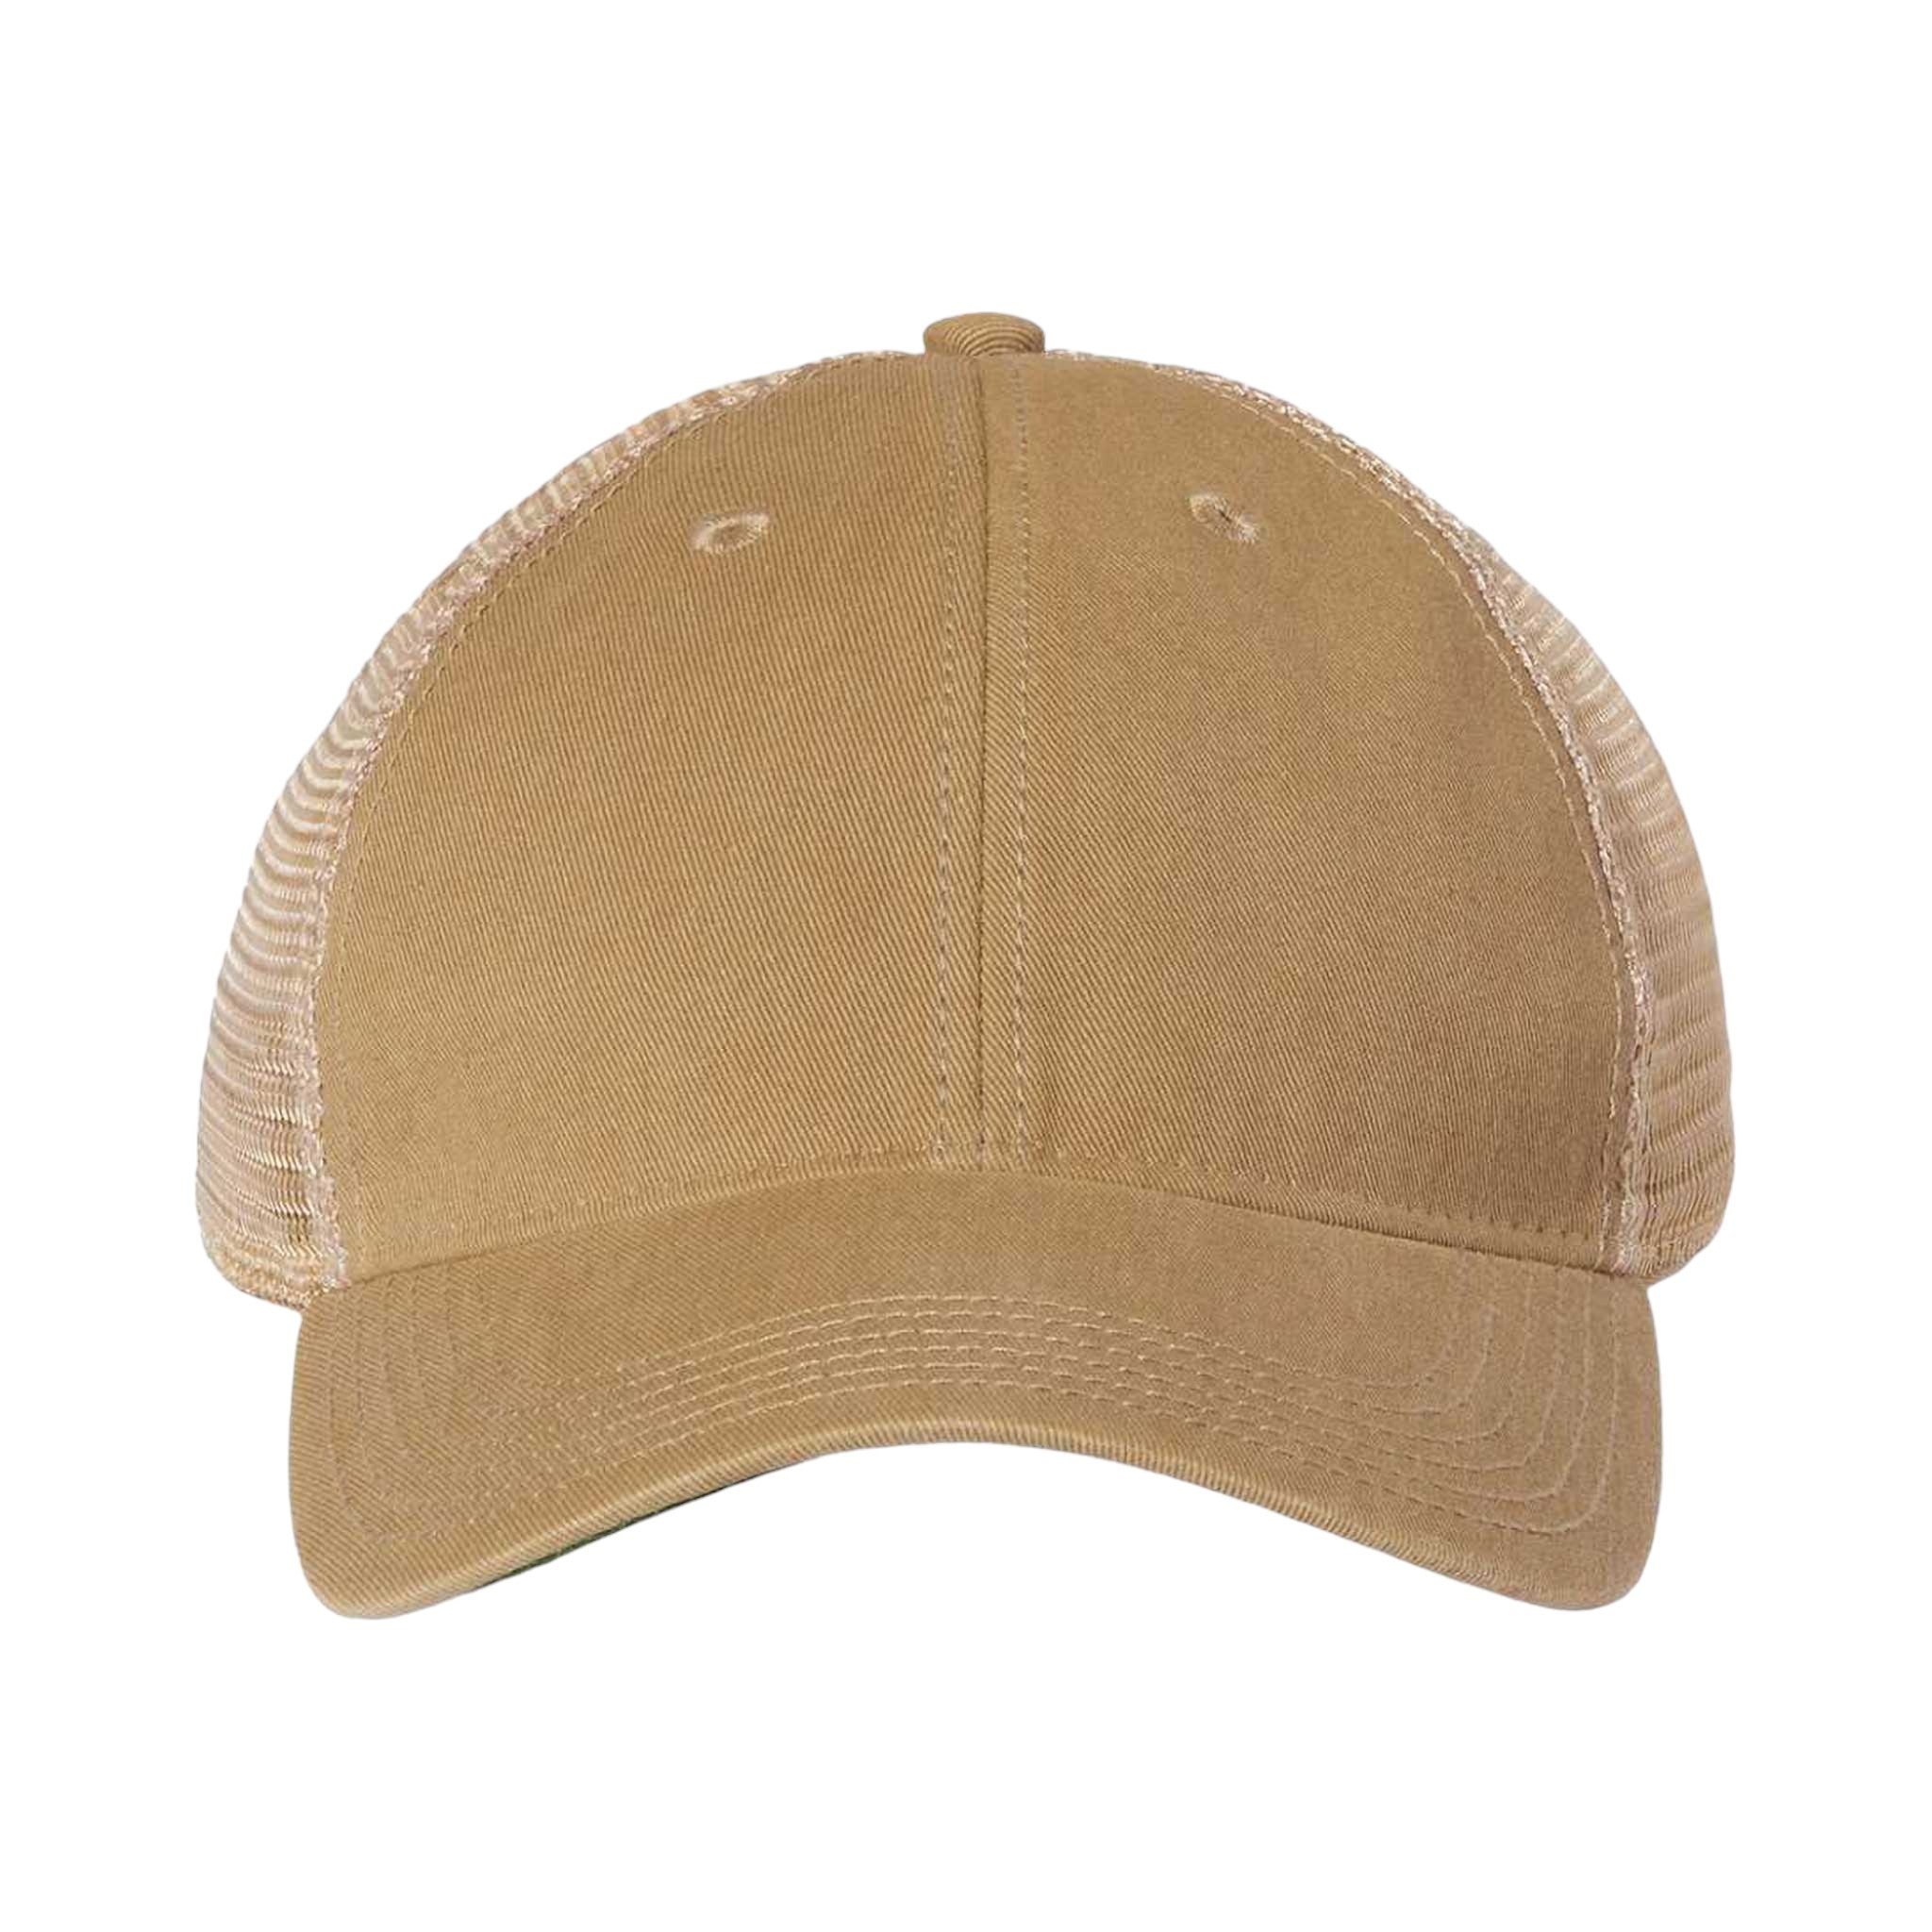 Front view of LEGACY OFA custom hat in khaki and khaki